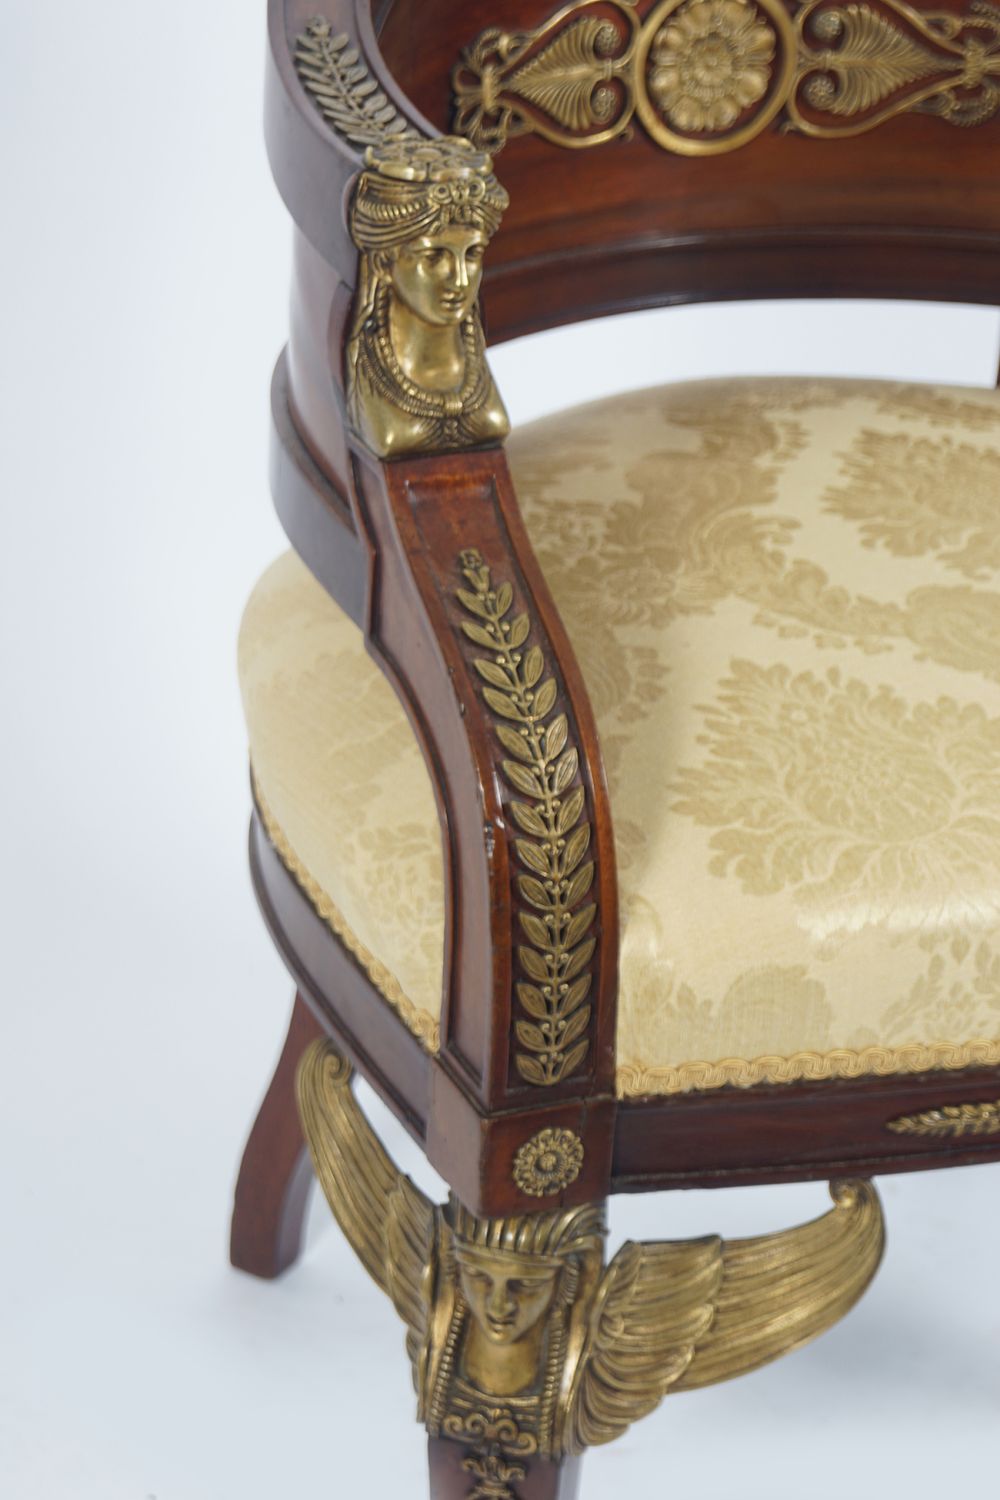 19TH-CENTURY MAHOGANY AND ORMOLU LIBRARY CHAIR - Image 3 of 3